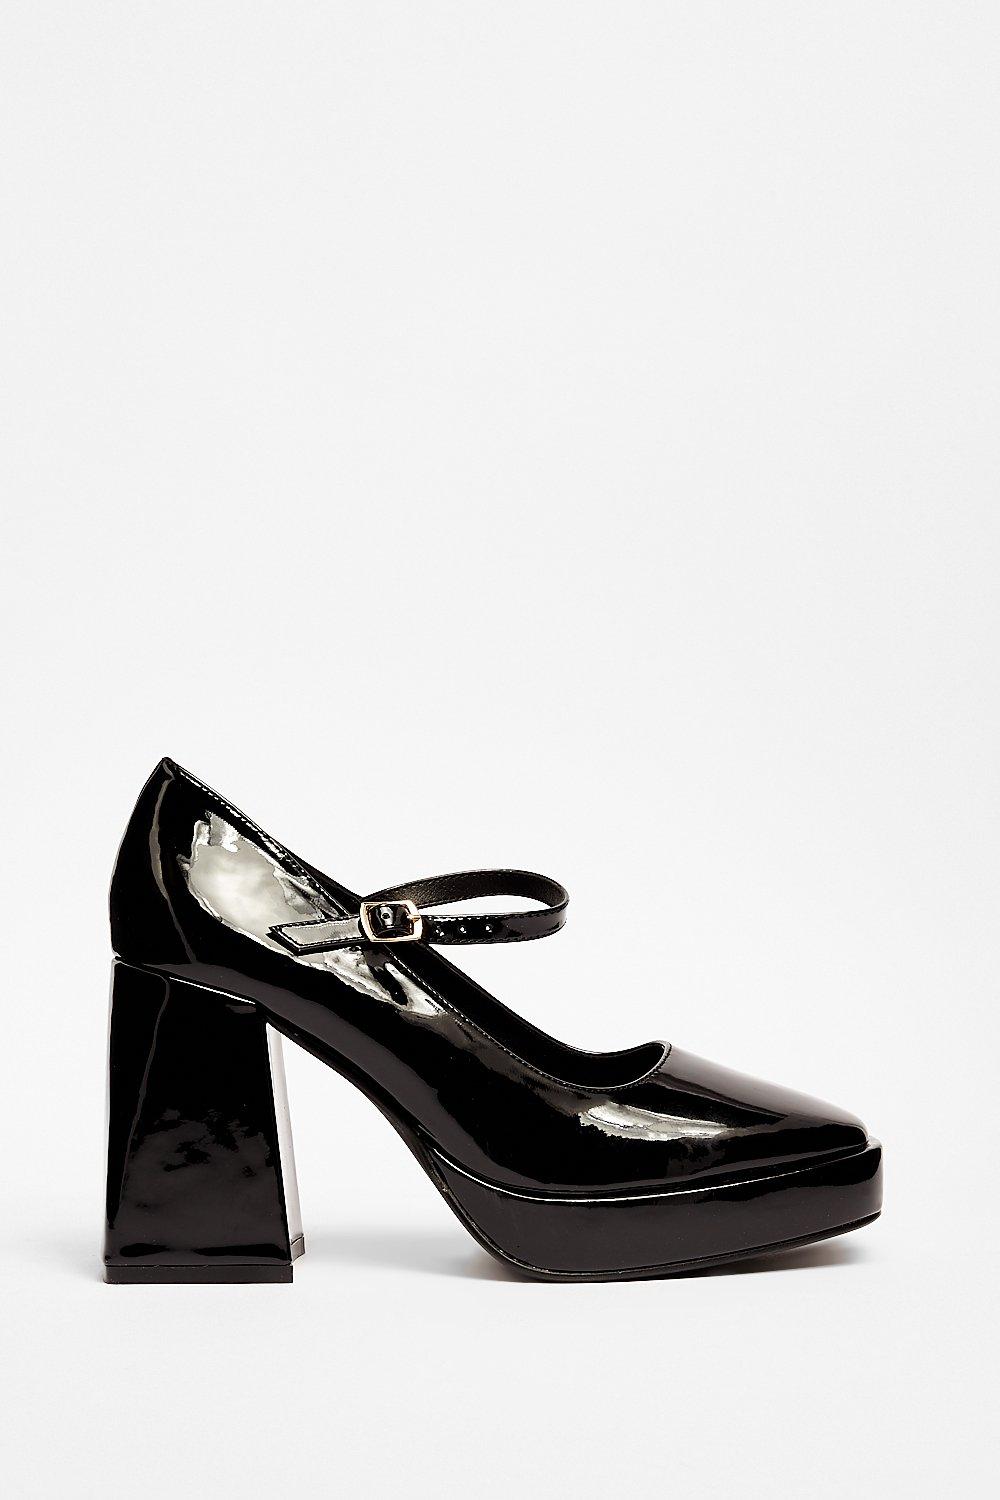 Patent Faux Leather Flare Heel Mary Jane Shoes